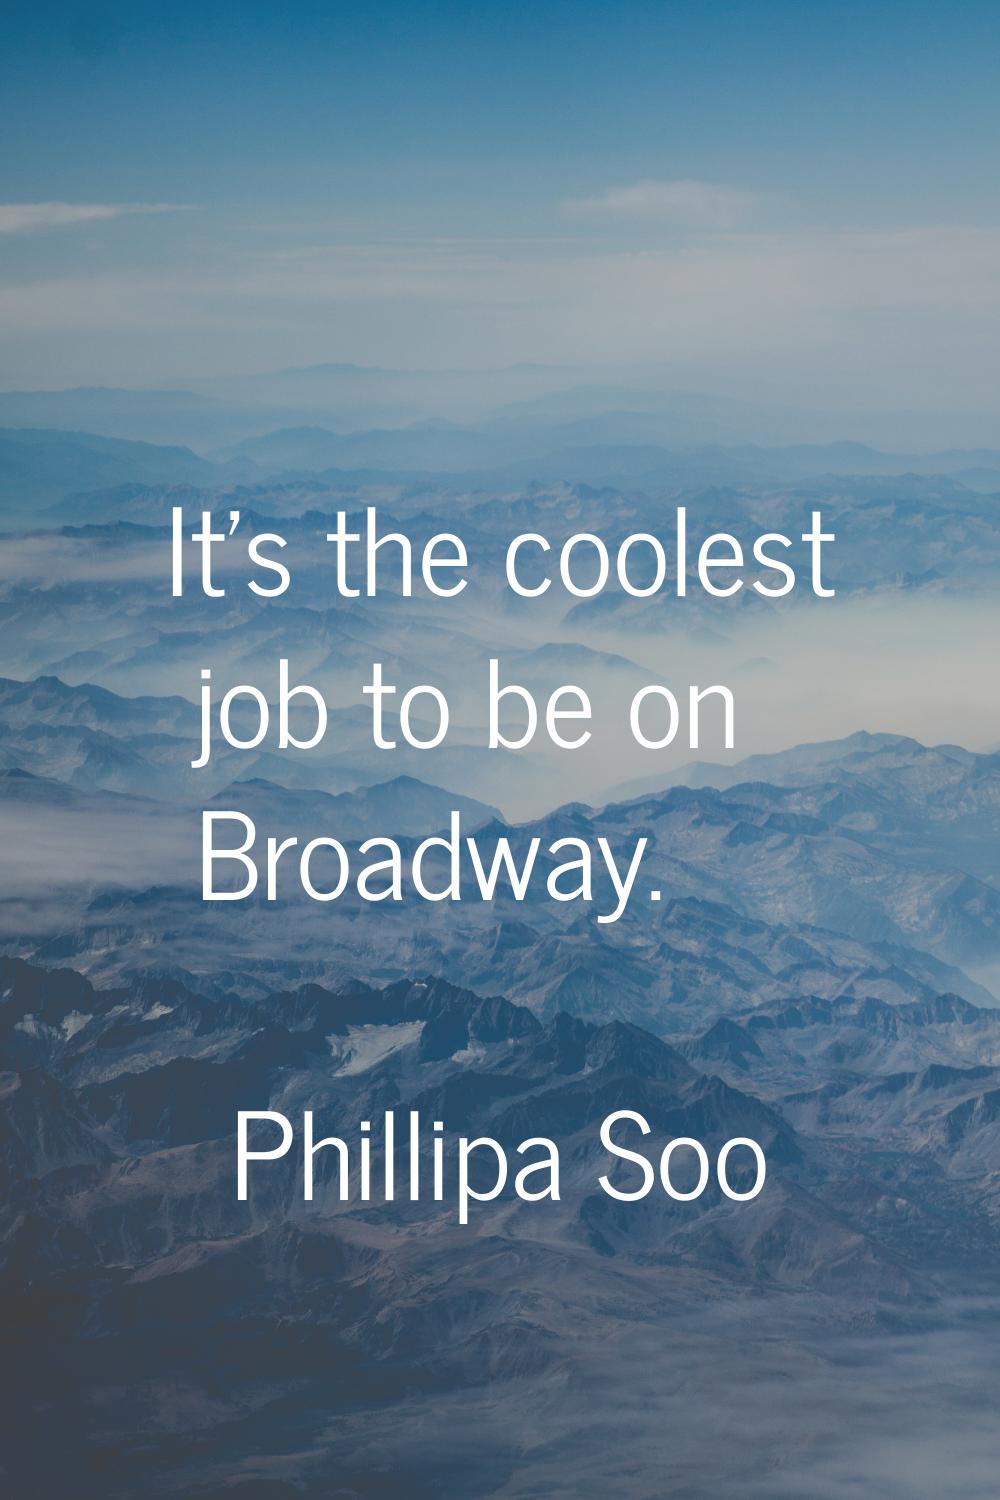 It's the coolest job to be on Broadway.